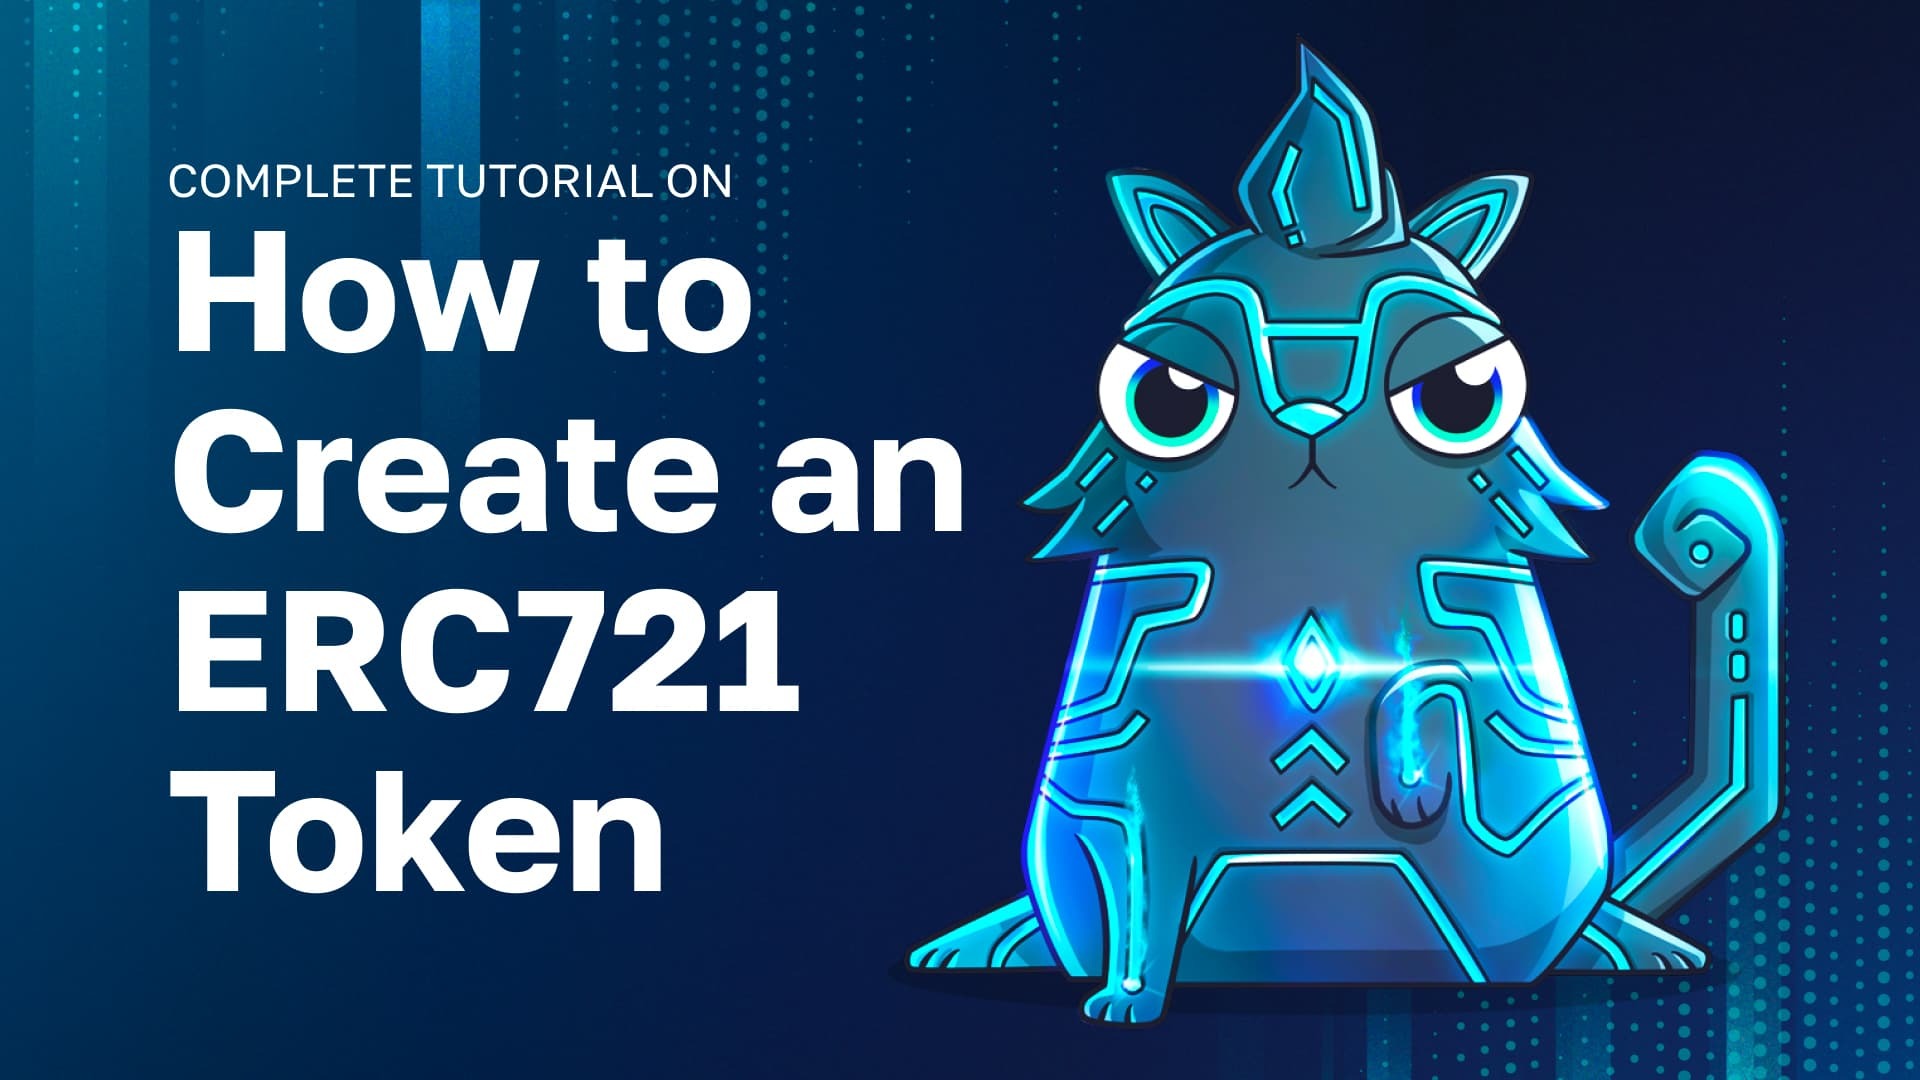 Complete Tutorial on How to Create an ERC721 Token